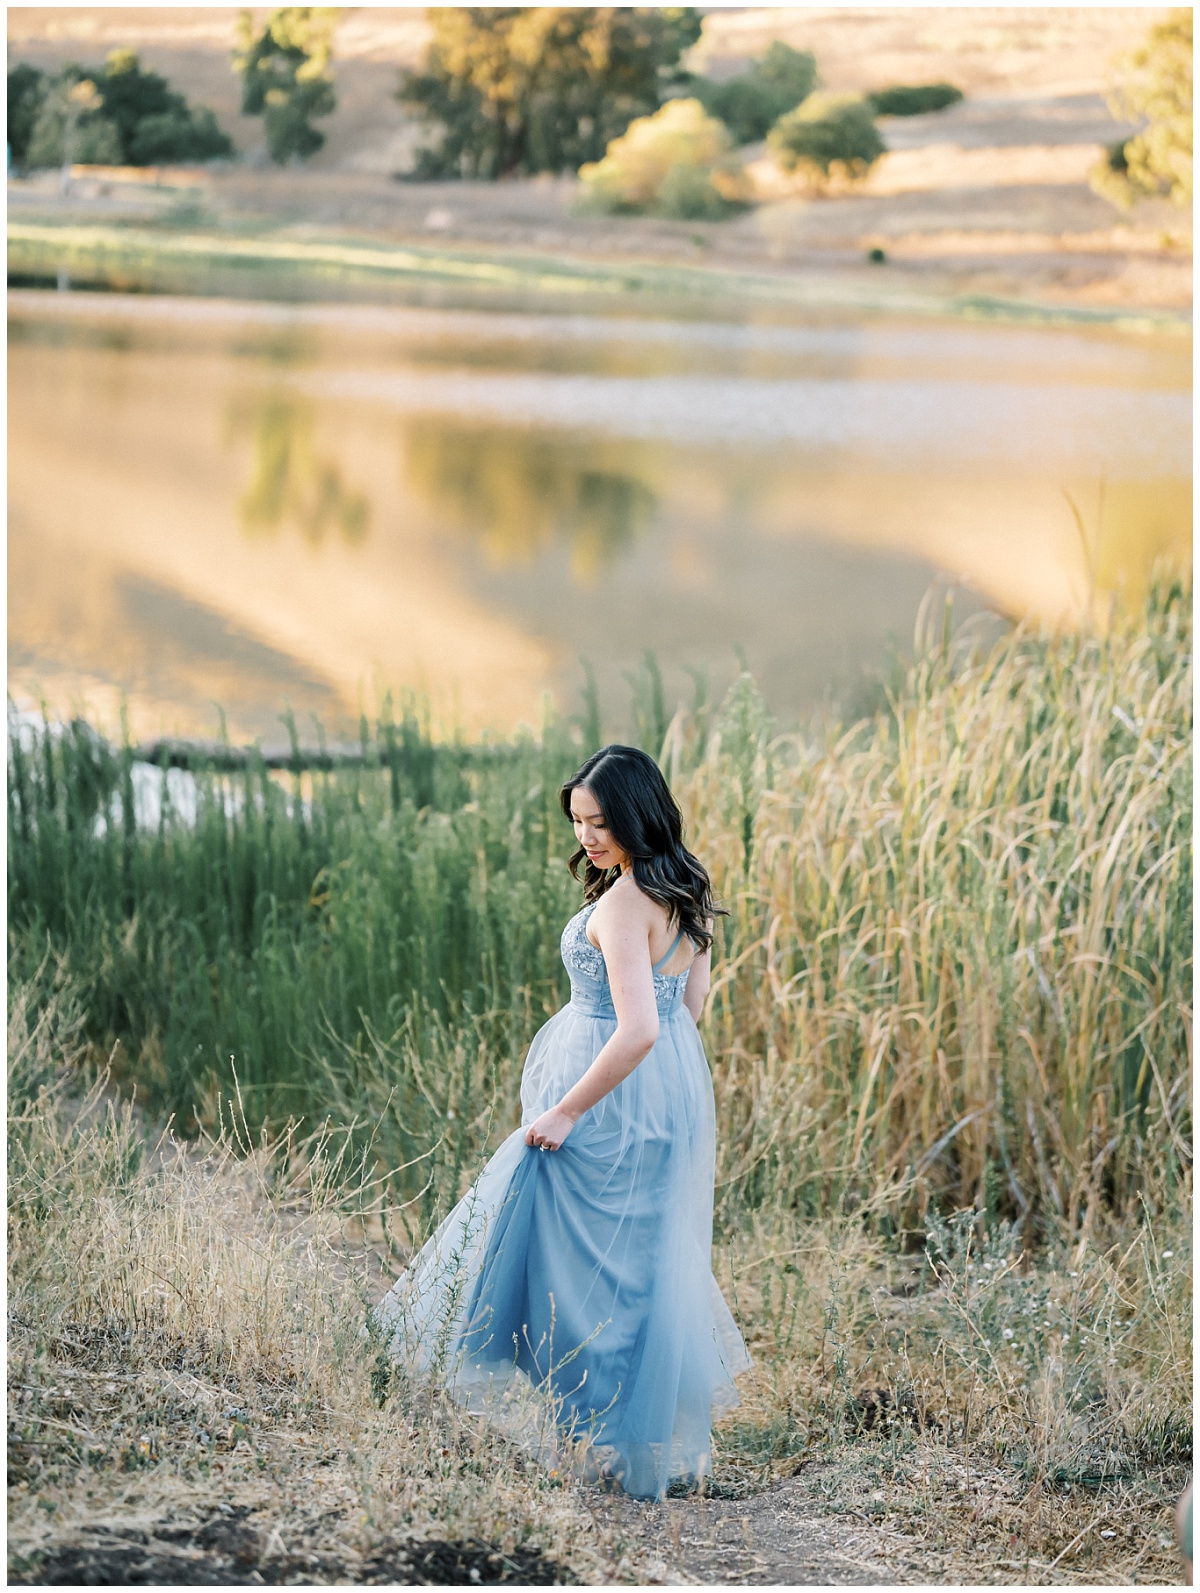 Dusty Blue Dress for Engagement Photos